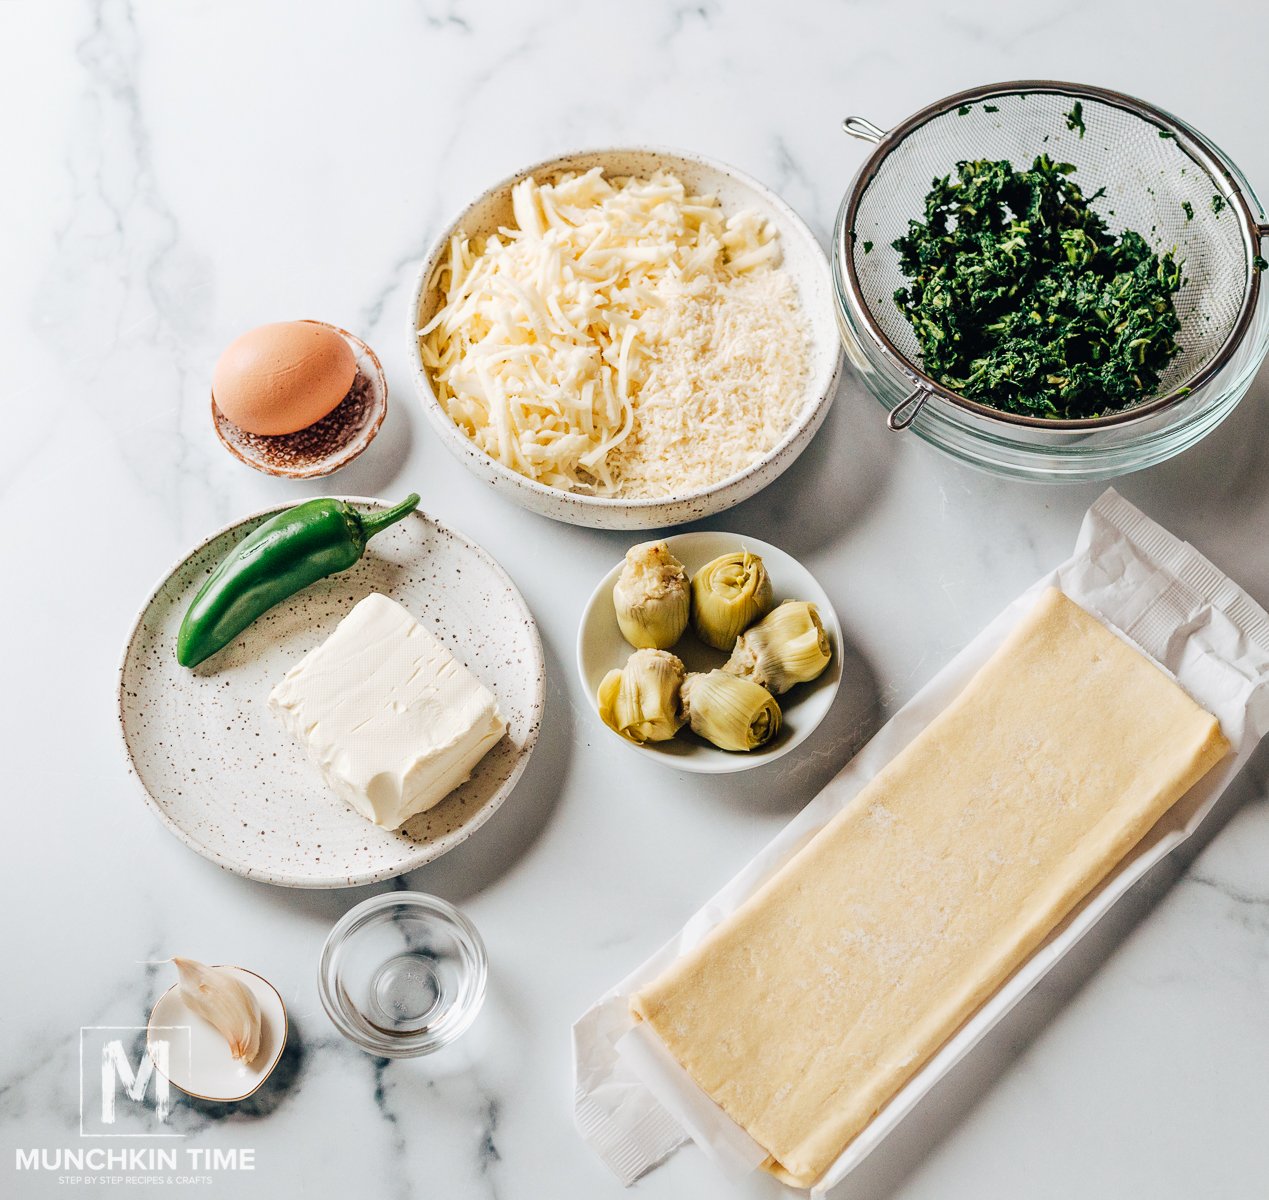 Ingredients need to make spinach dip